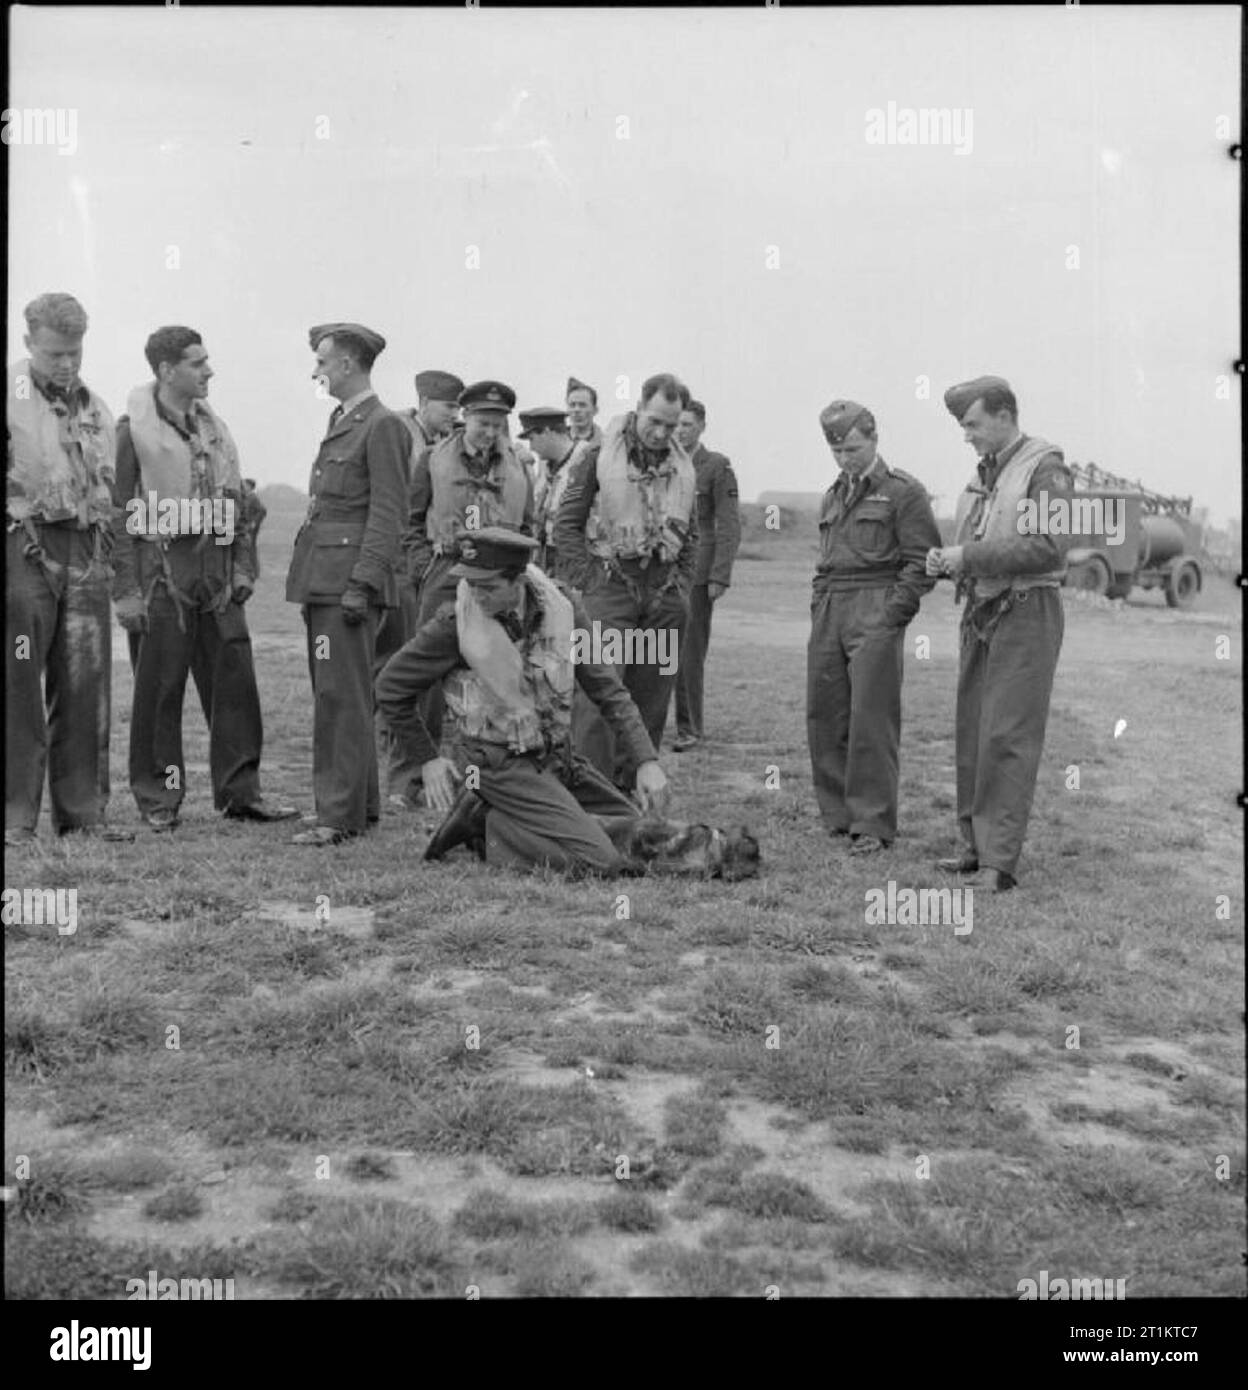 Americans in Britain- the work of No 121 (eagle) Squadron RAF, Rochford, Essex, August 1942 Men of No 121 (Eagle) Squadron stand and wait for their call to action on the grass at Rochford airfield. Left to right they are: Flying Officer K M Osbourne, Squadron Leader W B Williams DFC (the Commanding Officer), an unidentified English officer of the ground staff, Pilot Officer Don A Young, Pilot Officer Frank R Boyles, an unidentified squadron member, Flight Lieutenant Seldon R Edner, Flight Sergeant Jim Sanders, an unidentified squadron member, Pilot Officer Jim Happel and another unidentified s Stock Photo